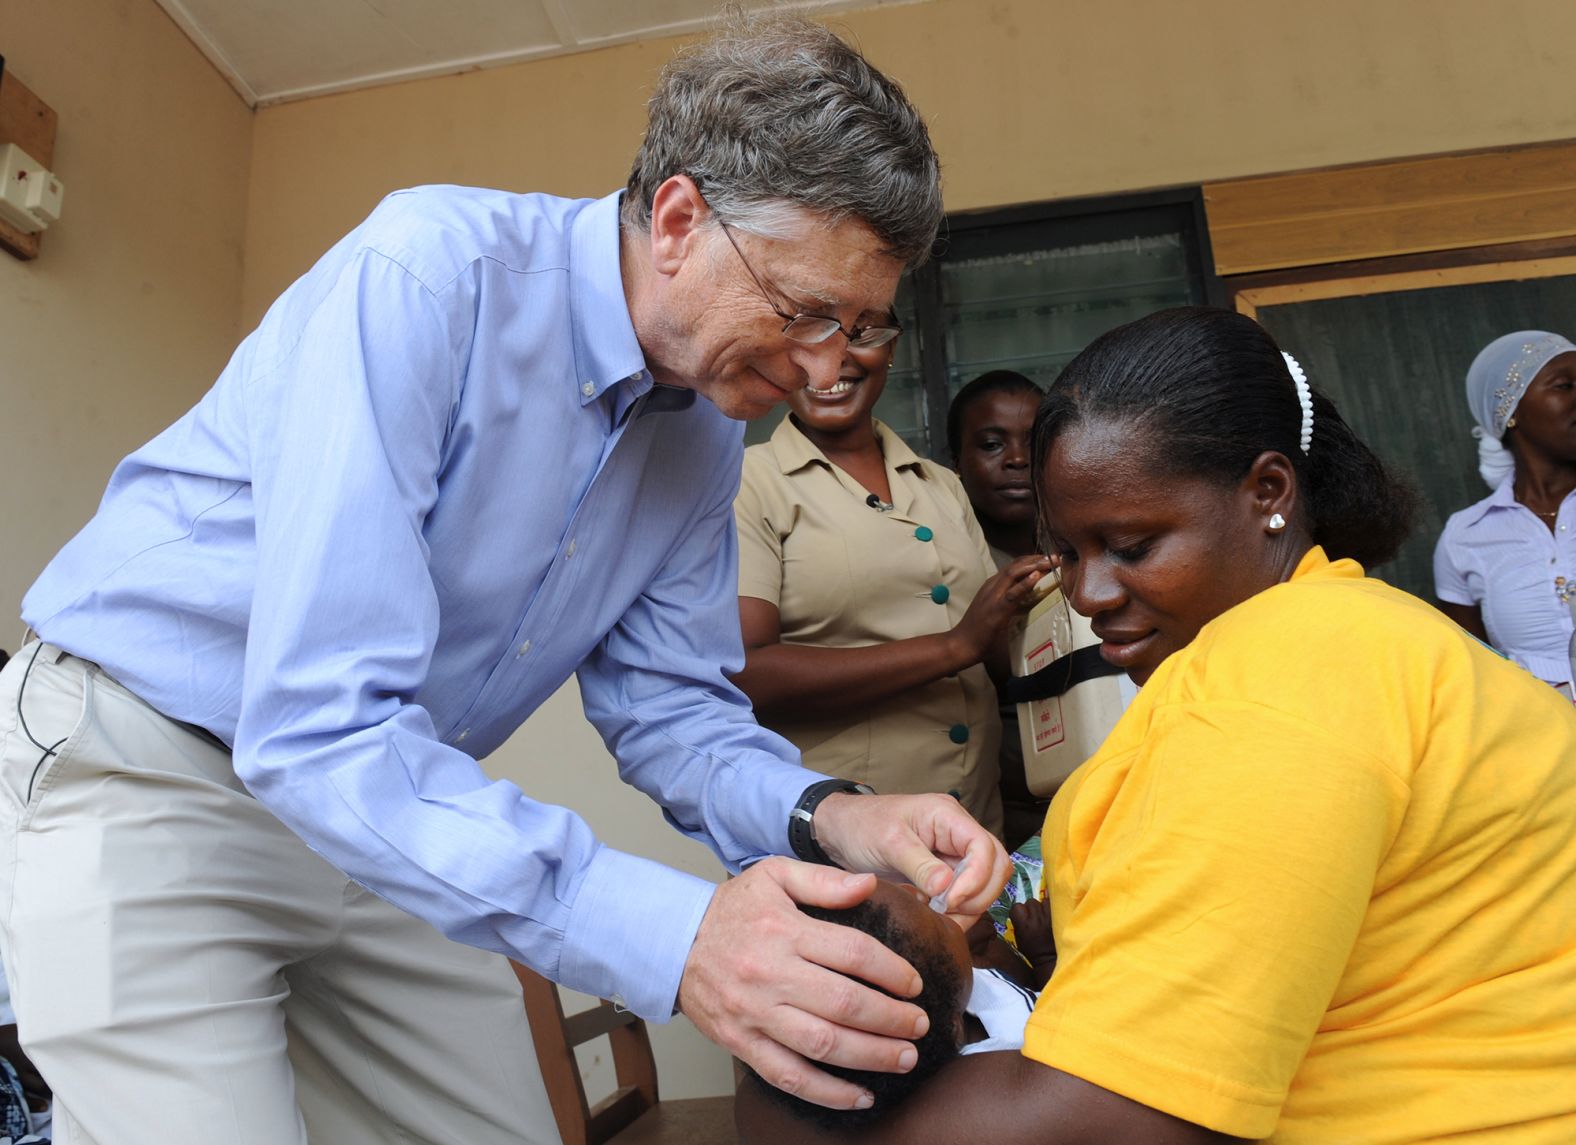 Gates gives a child a rotavirus vaccine while visiting Ghana in 2013.